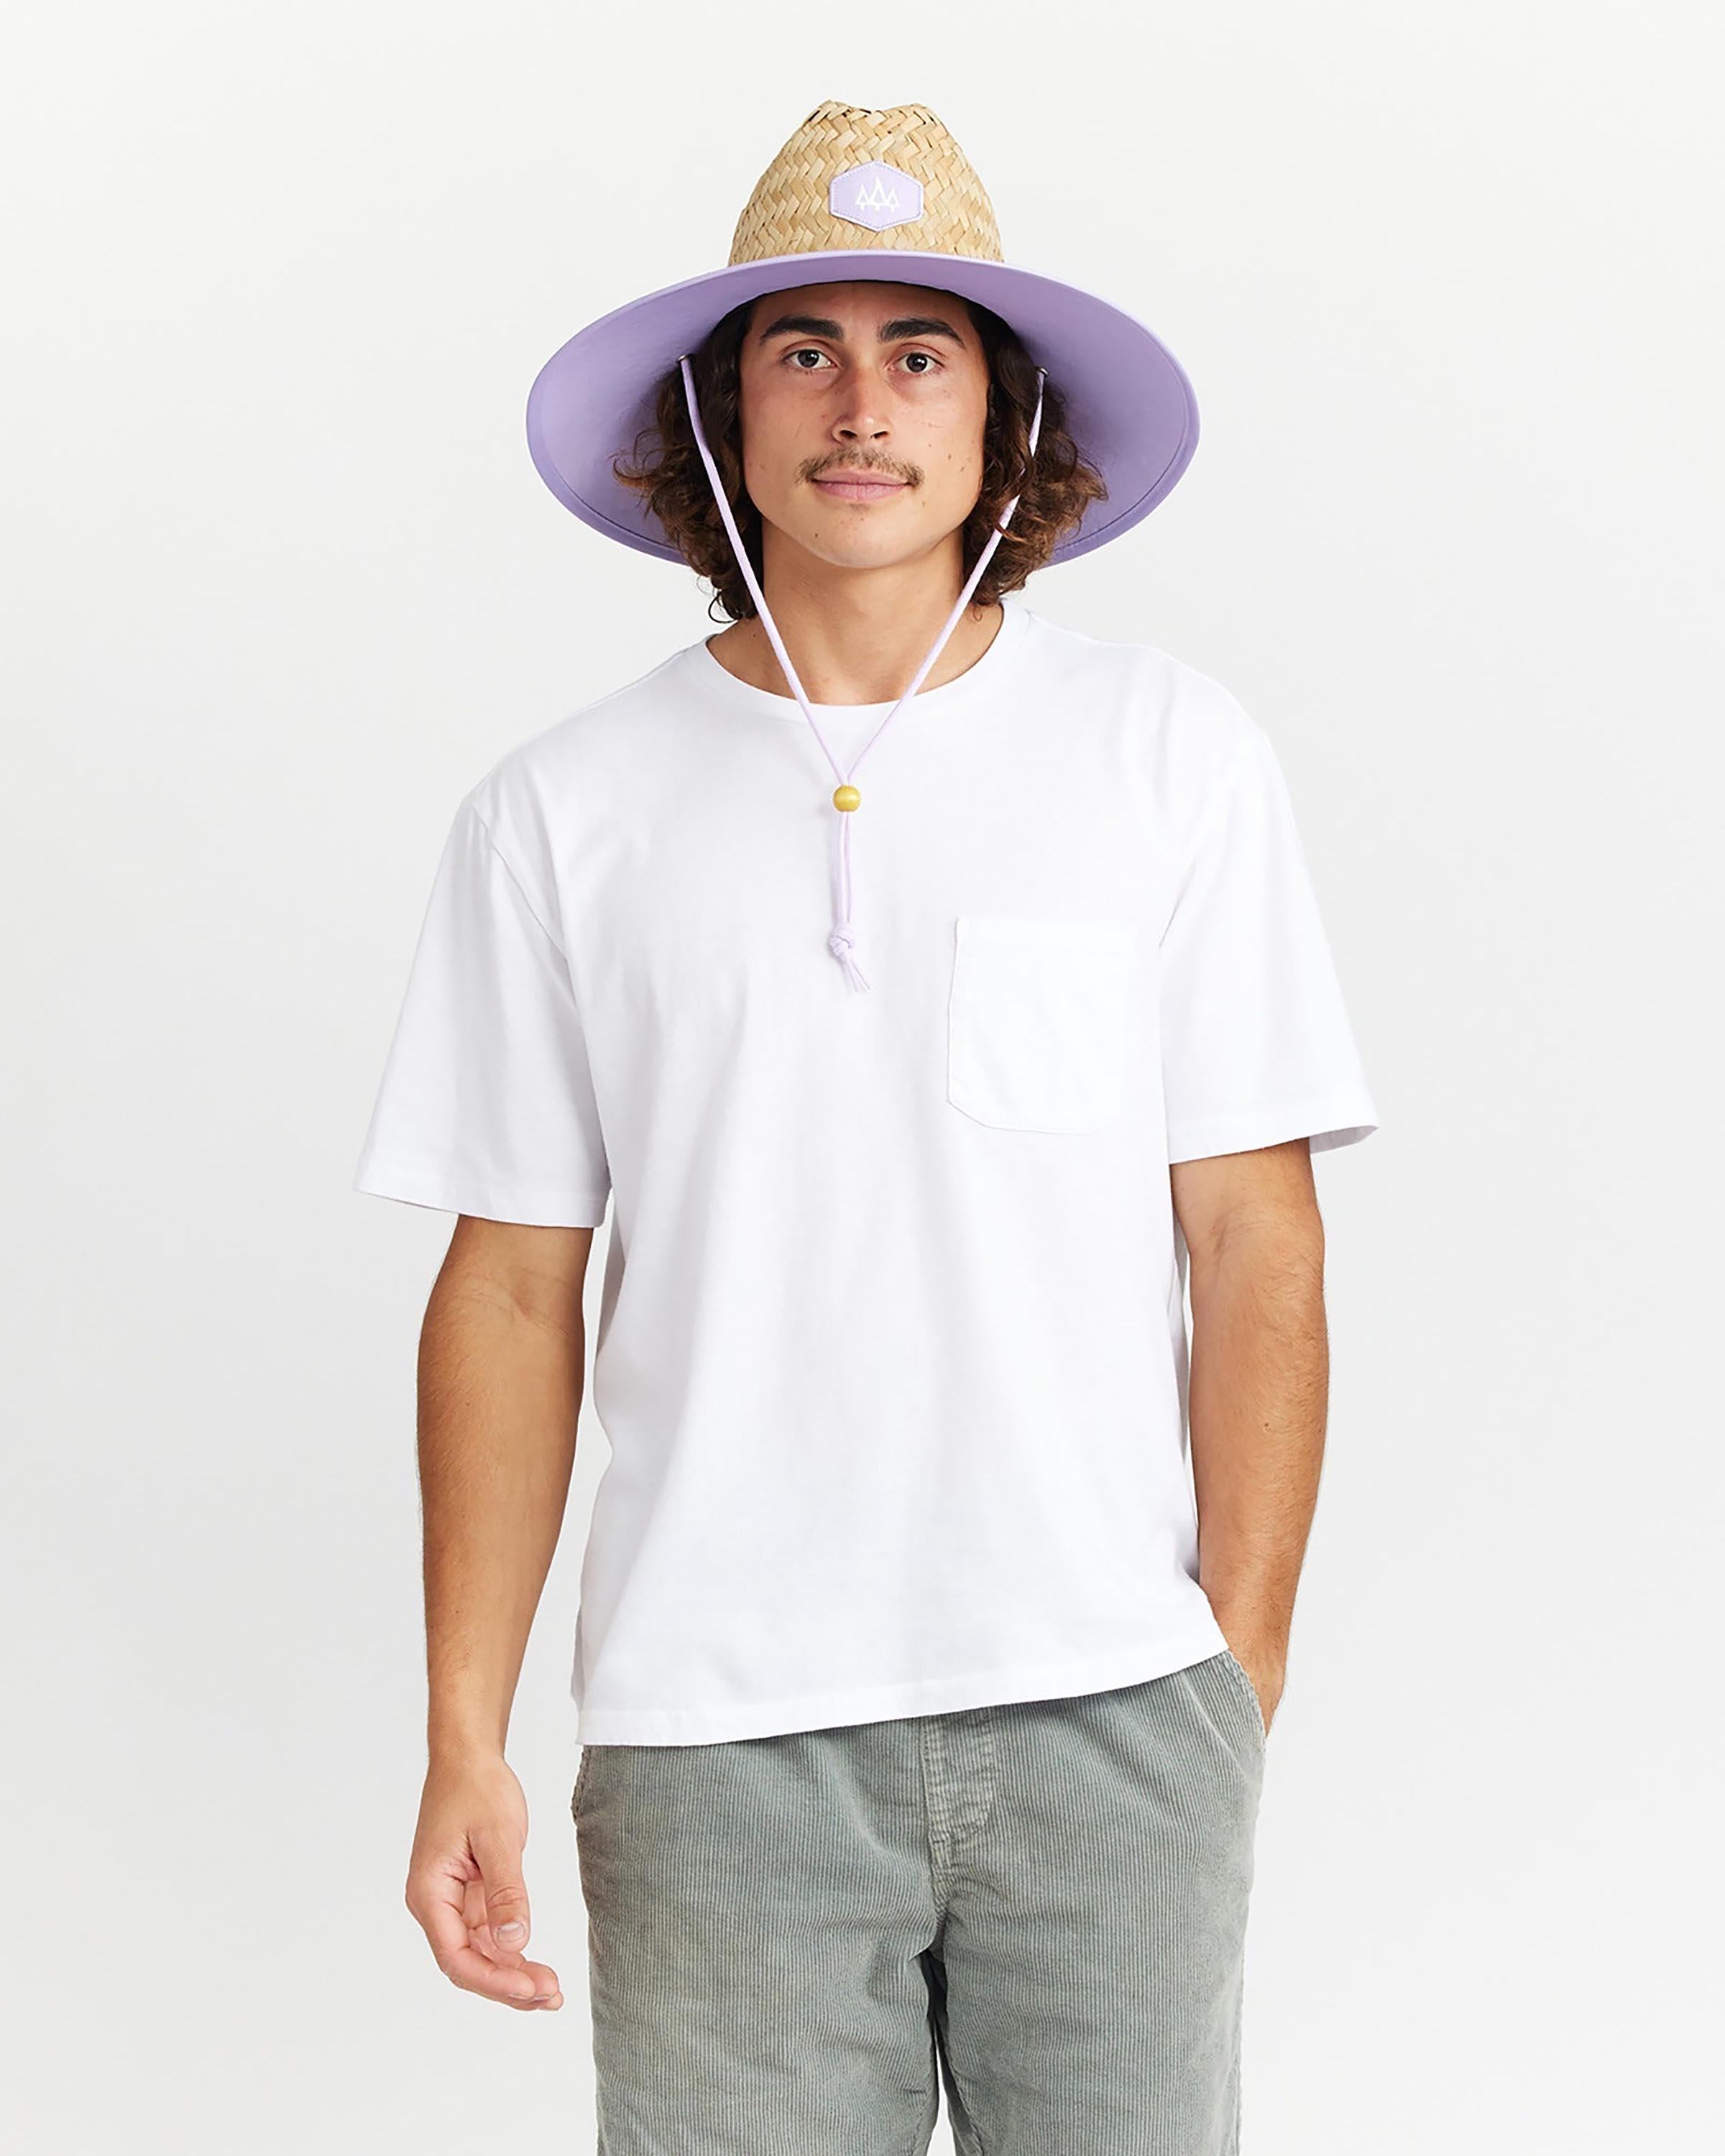 Ube - undefined - Hemlock Hat Co. Lifeguards - Adults